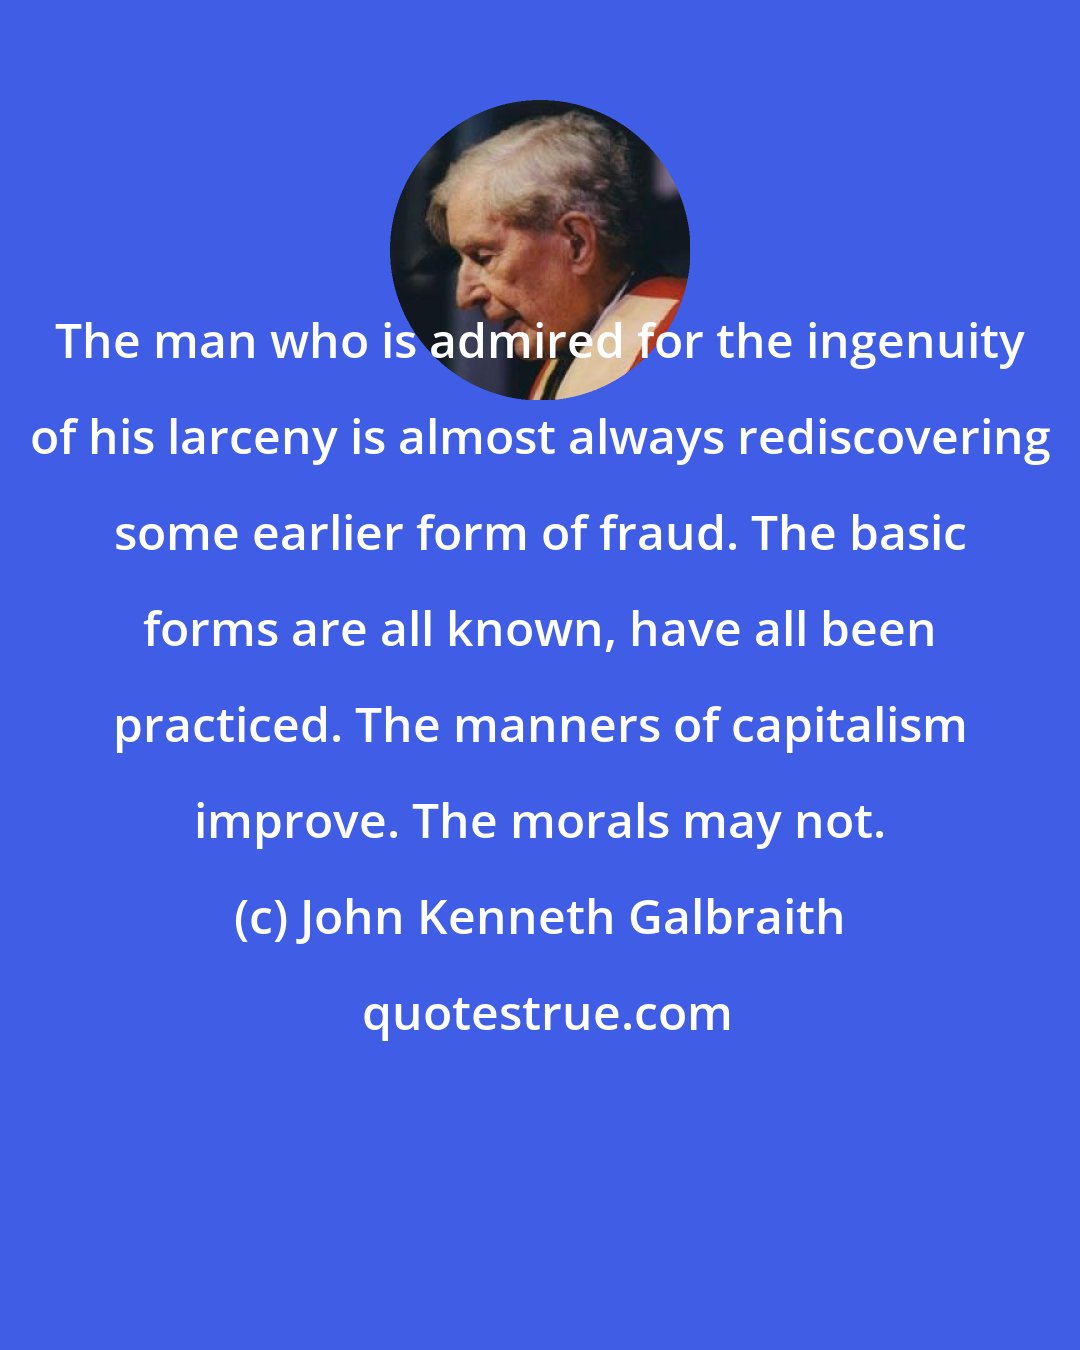 John Kenneth Galbraith: The man who is admired for the ingenuity of his larceny is almost always rediscovering some earlier form of fraud. The basic forms are all known, have all been practiced. The manners of capitalism improve. The morals may not.